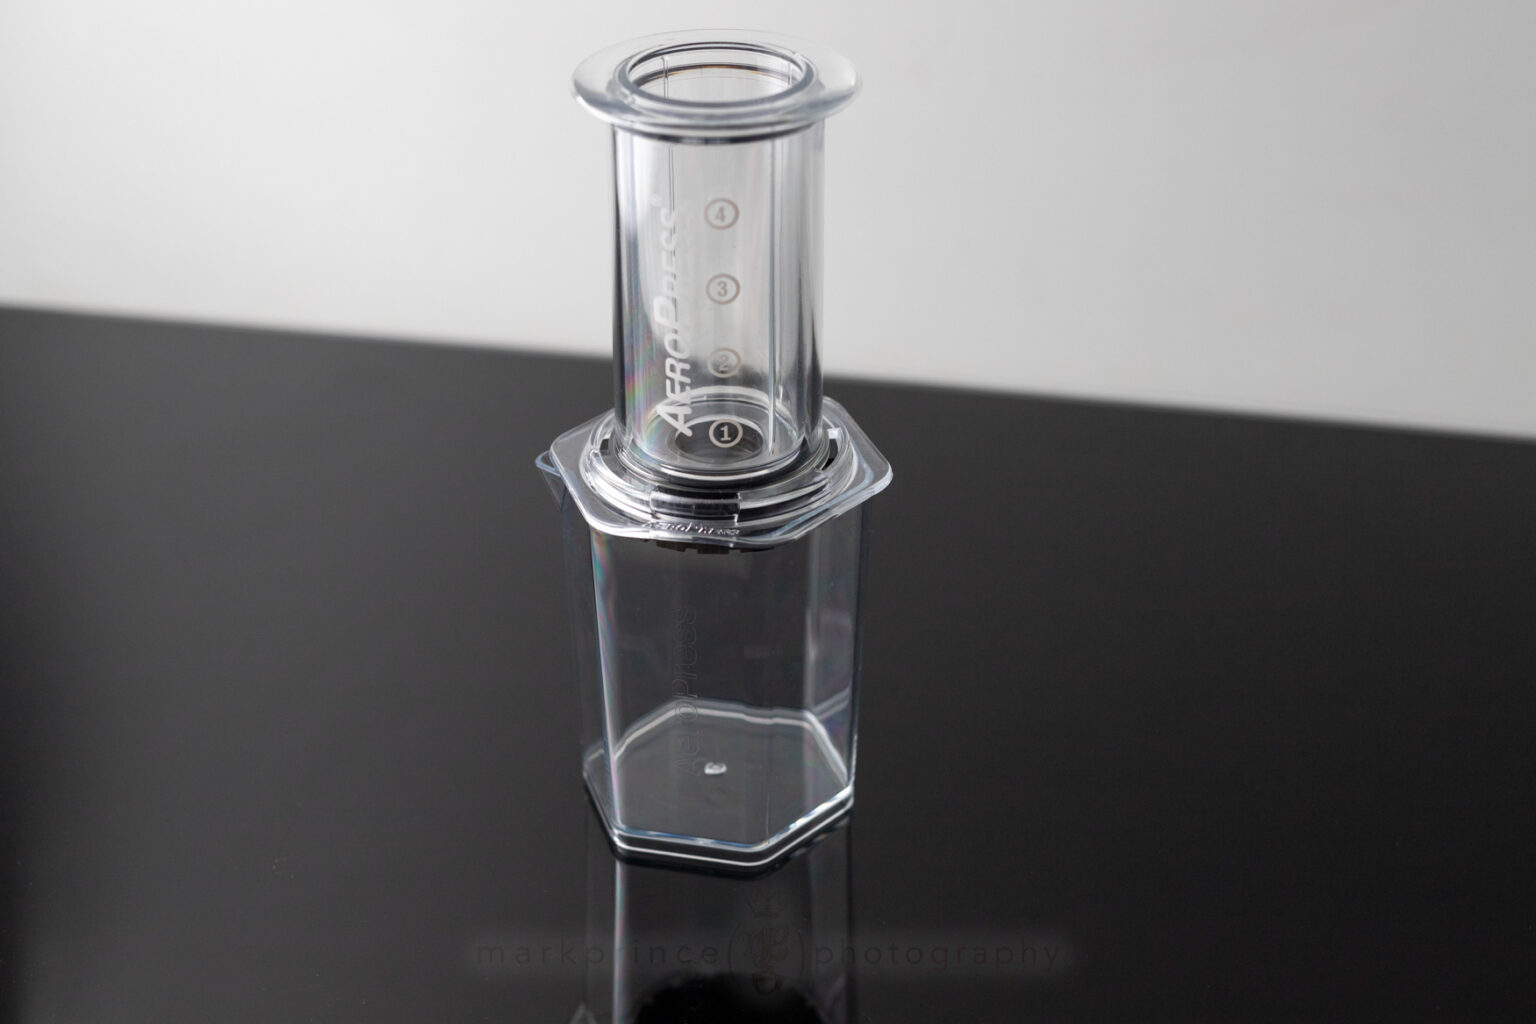 The Tritan plastic carafe that ships with the AeroPress XL works fine with standard AeroPress models